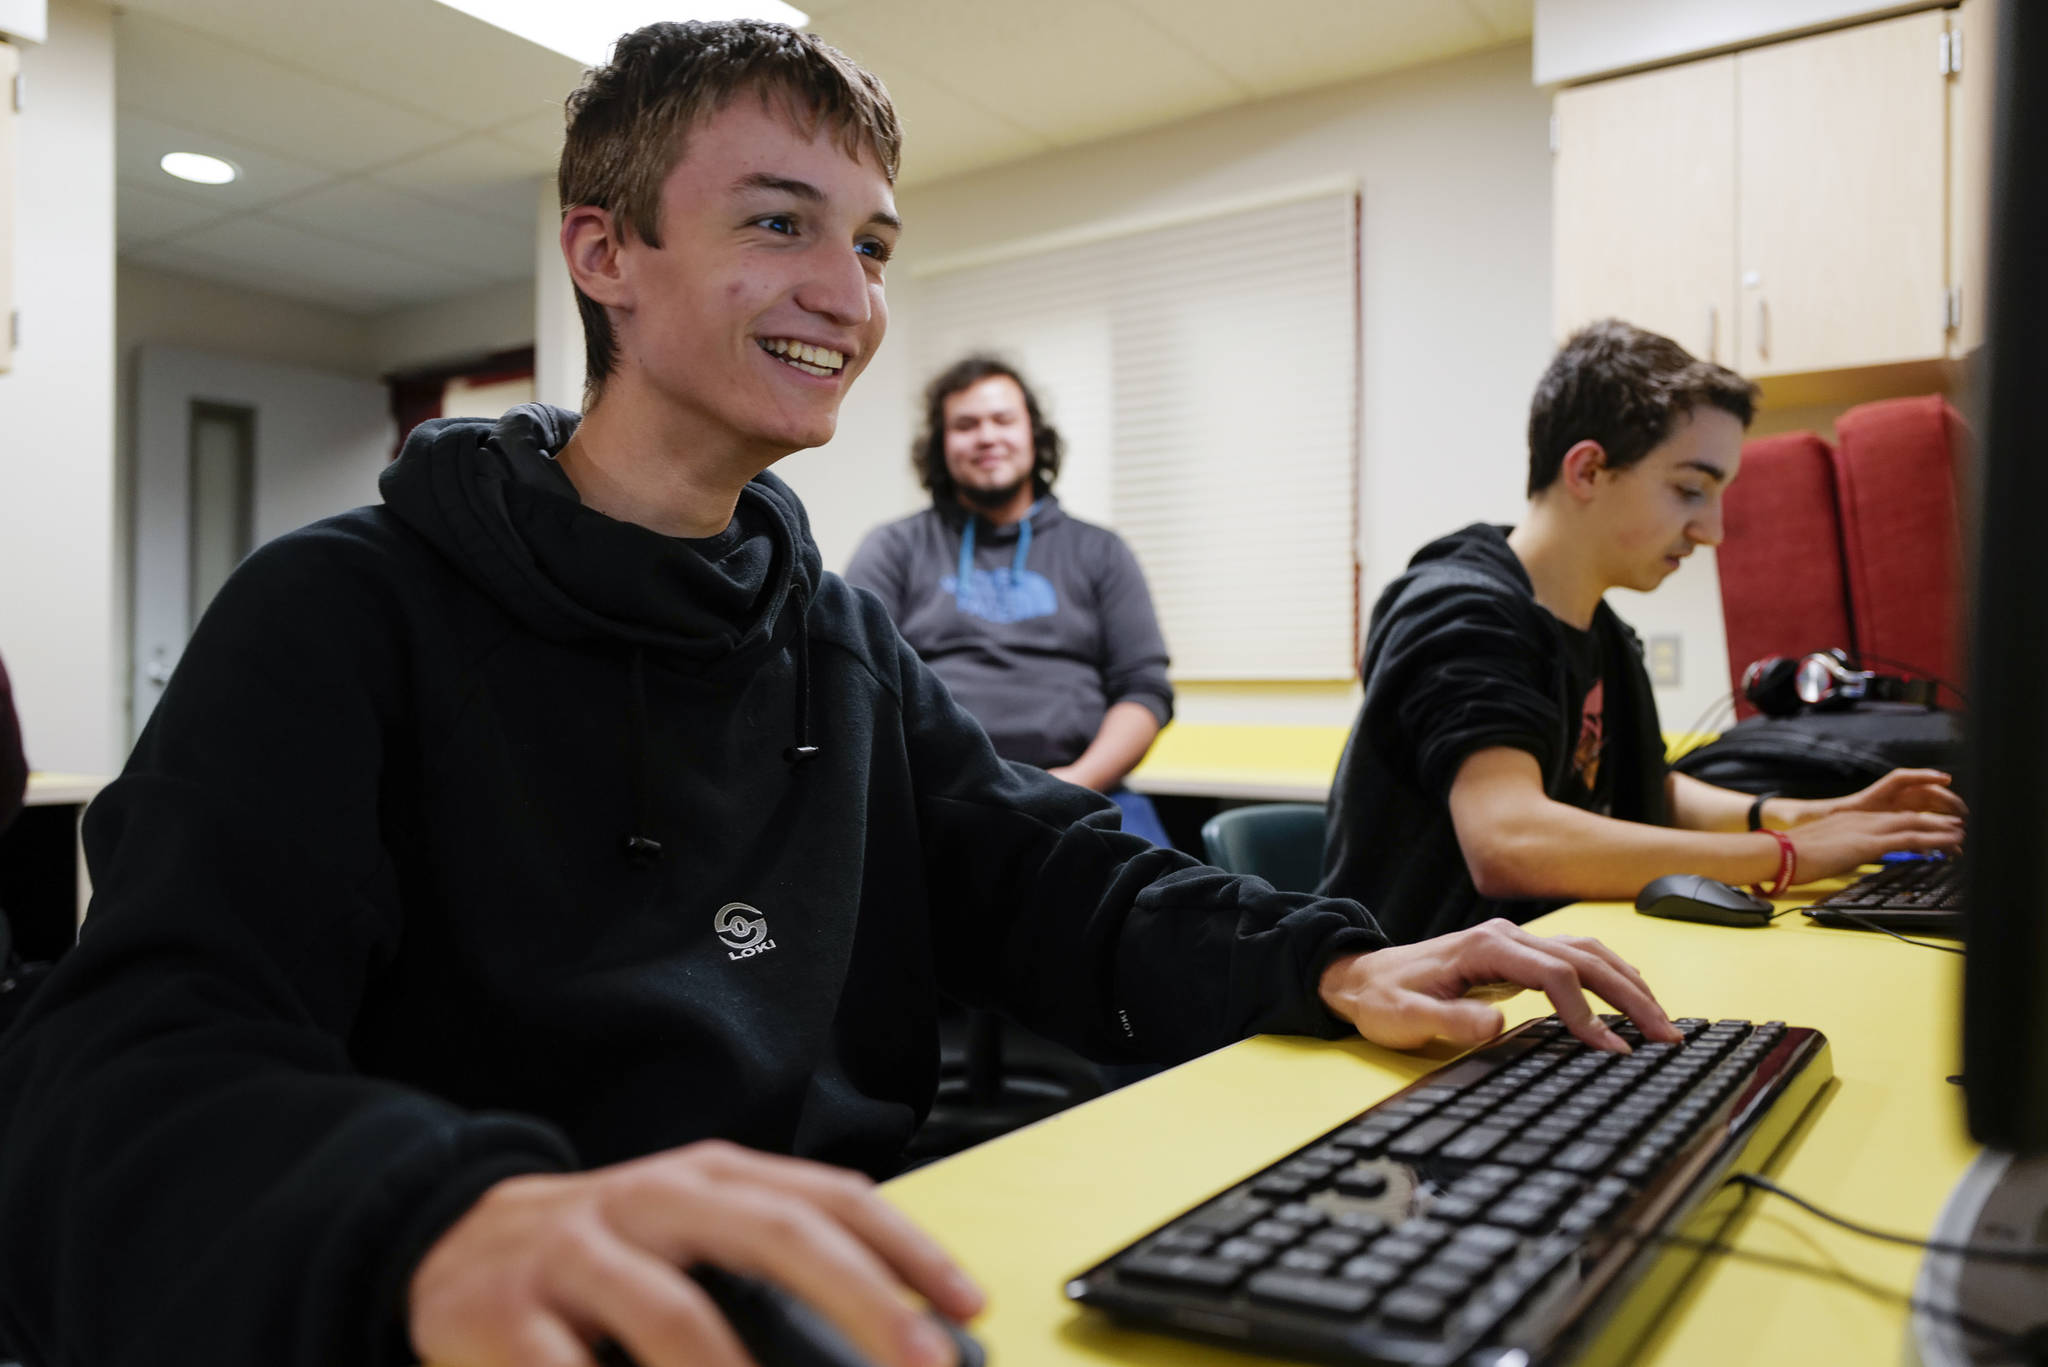 Pass the controller: Thunder Mountain High School launches new esports team